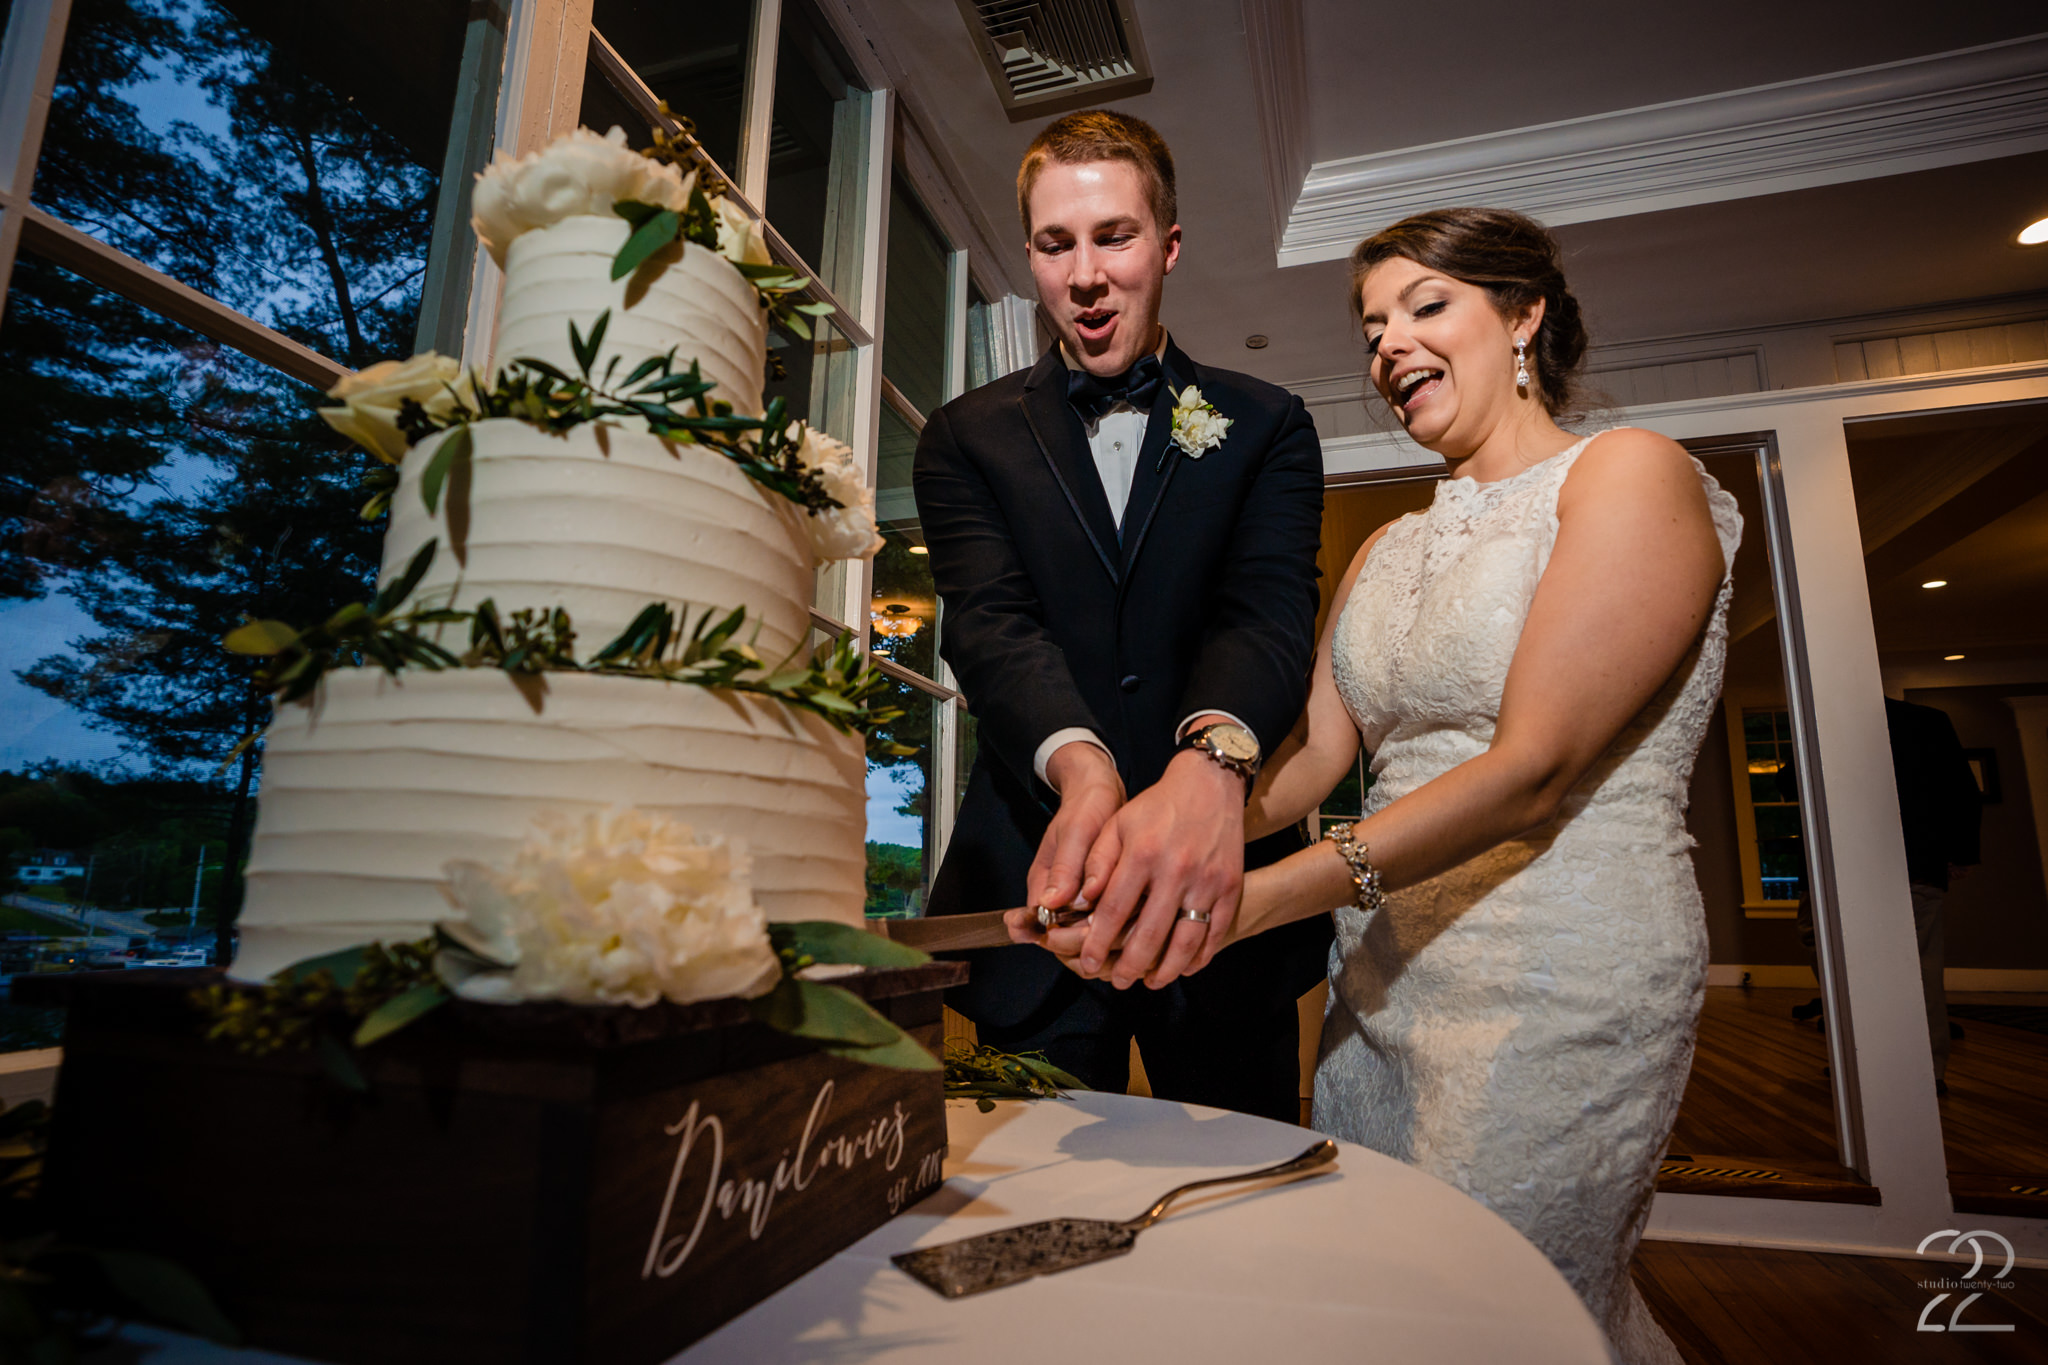  Allen Morter created an elegant wedding cake for Andrea and Patrick, they almost didn’t want to cut it! 